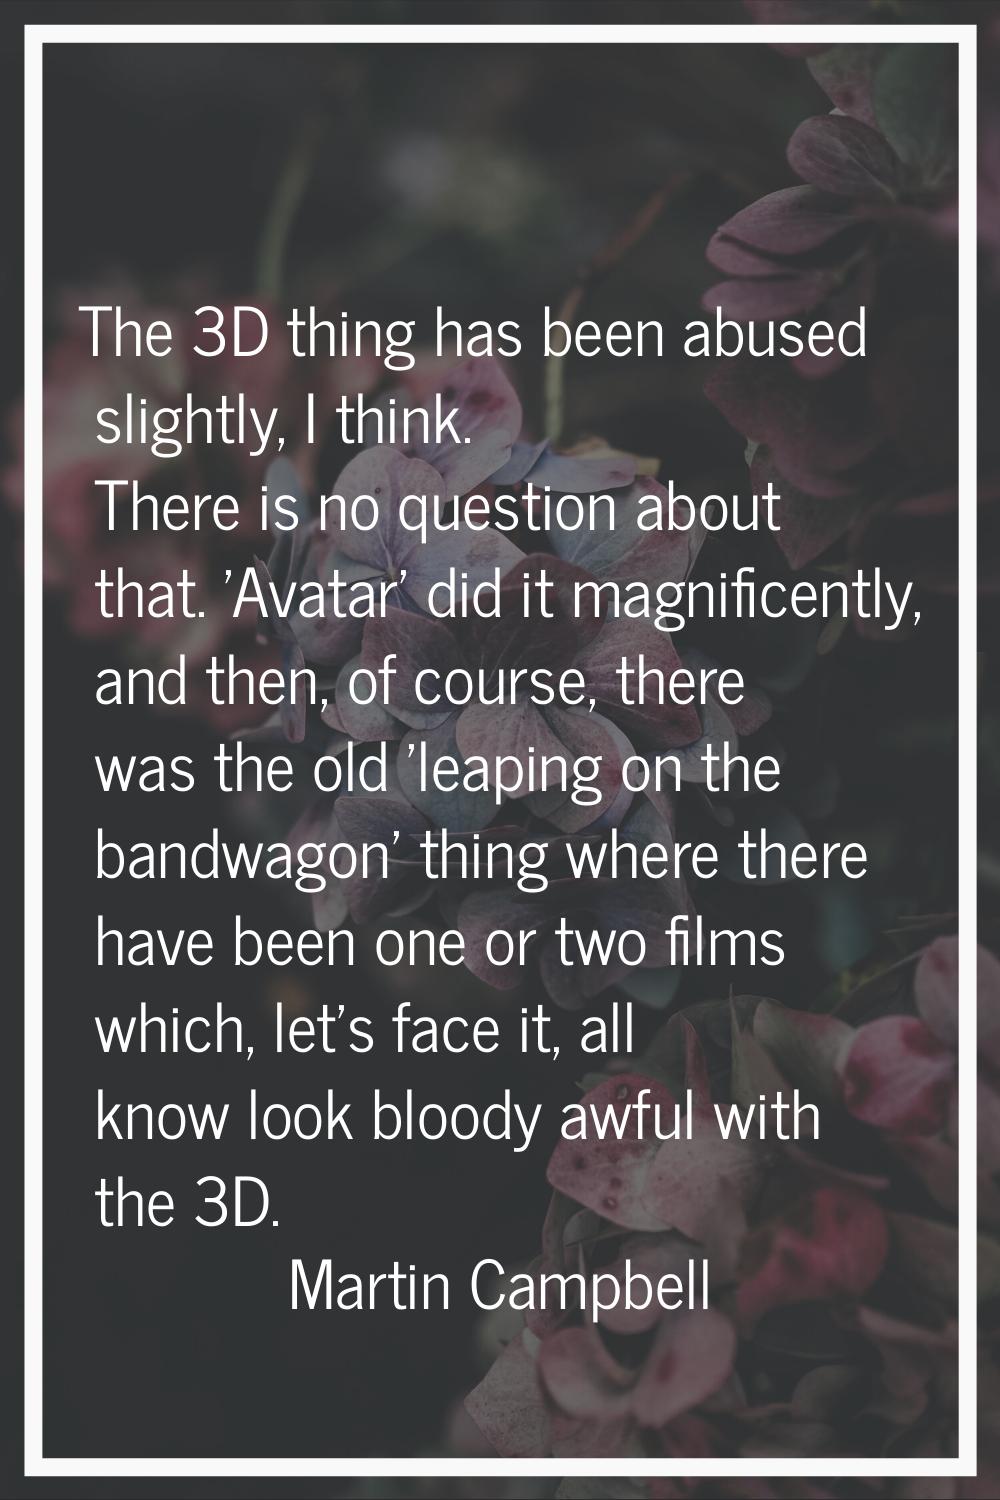 The 3D thing has been abused slightly, I think. There is no question about that. 'Avatar' did it ma